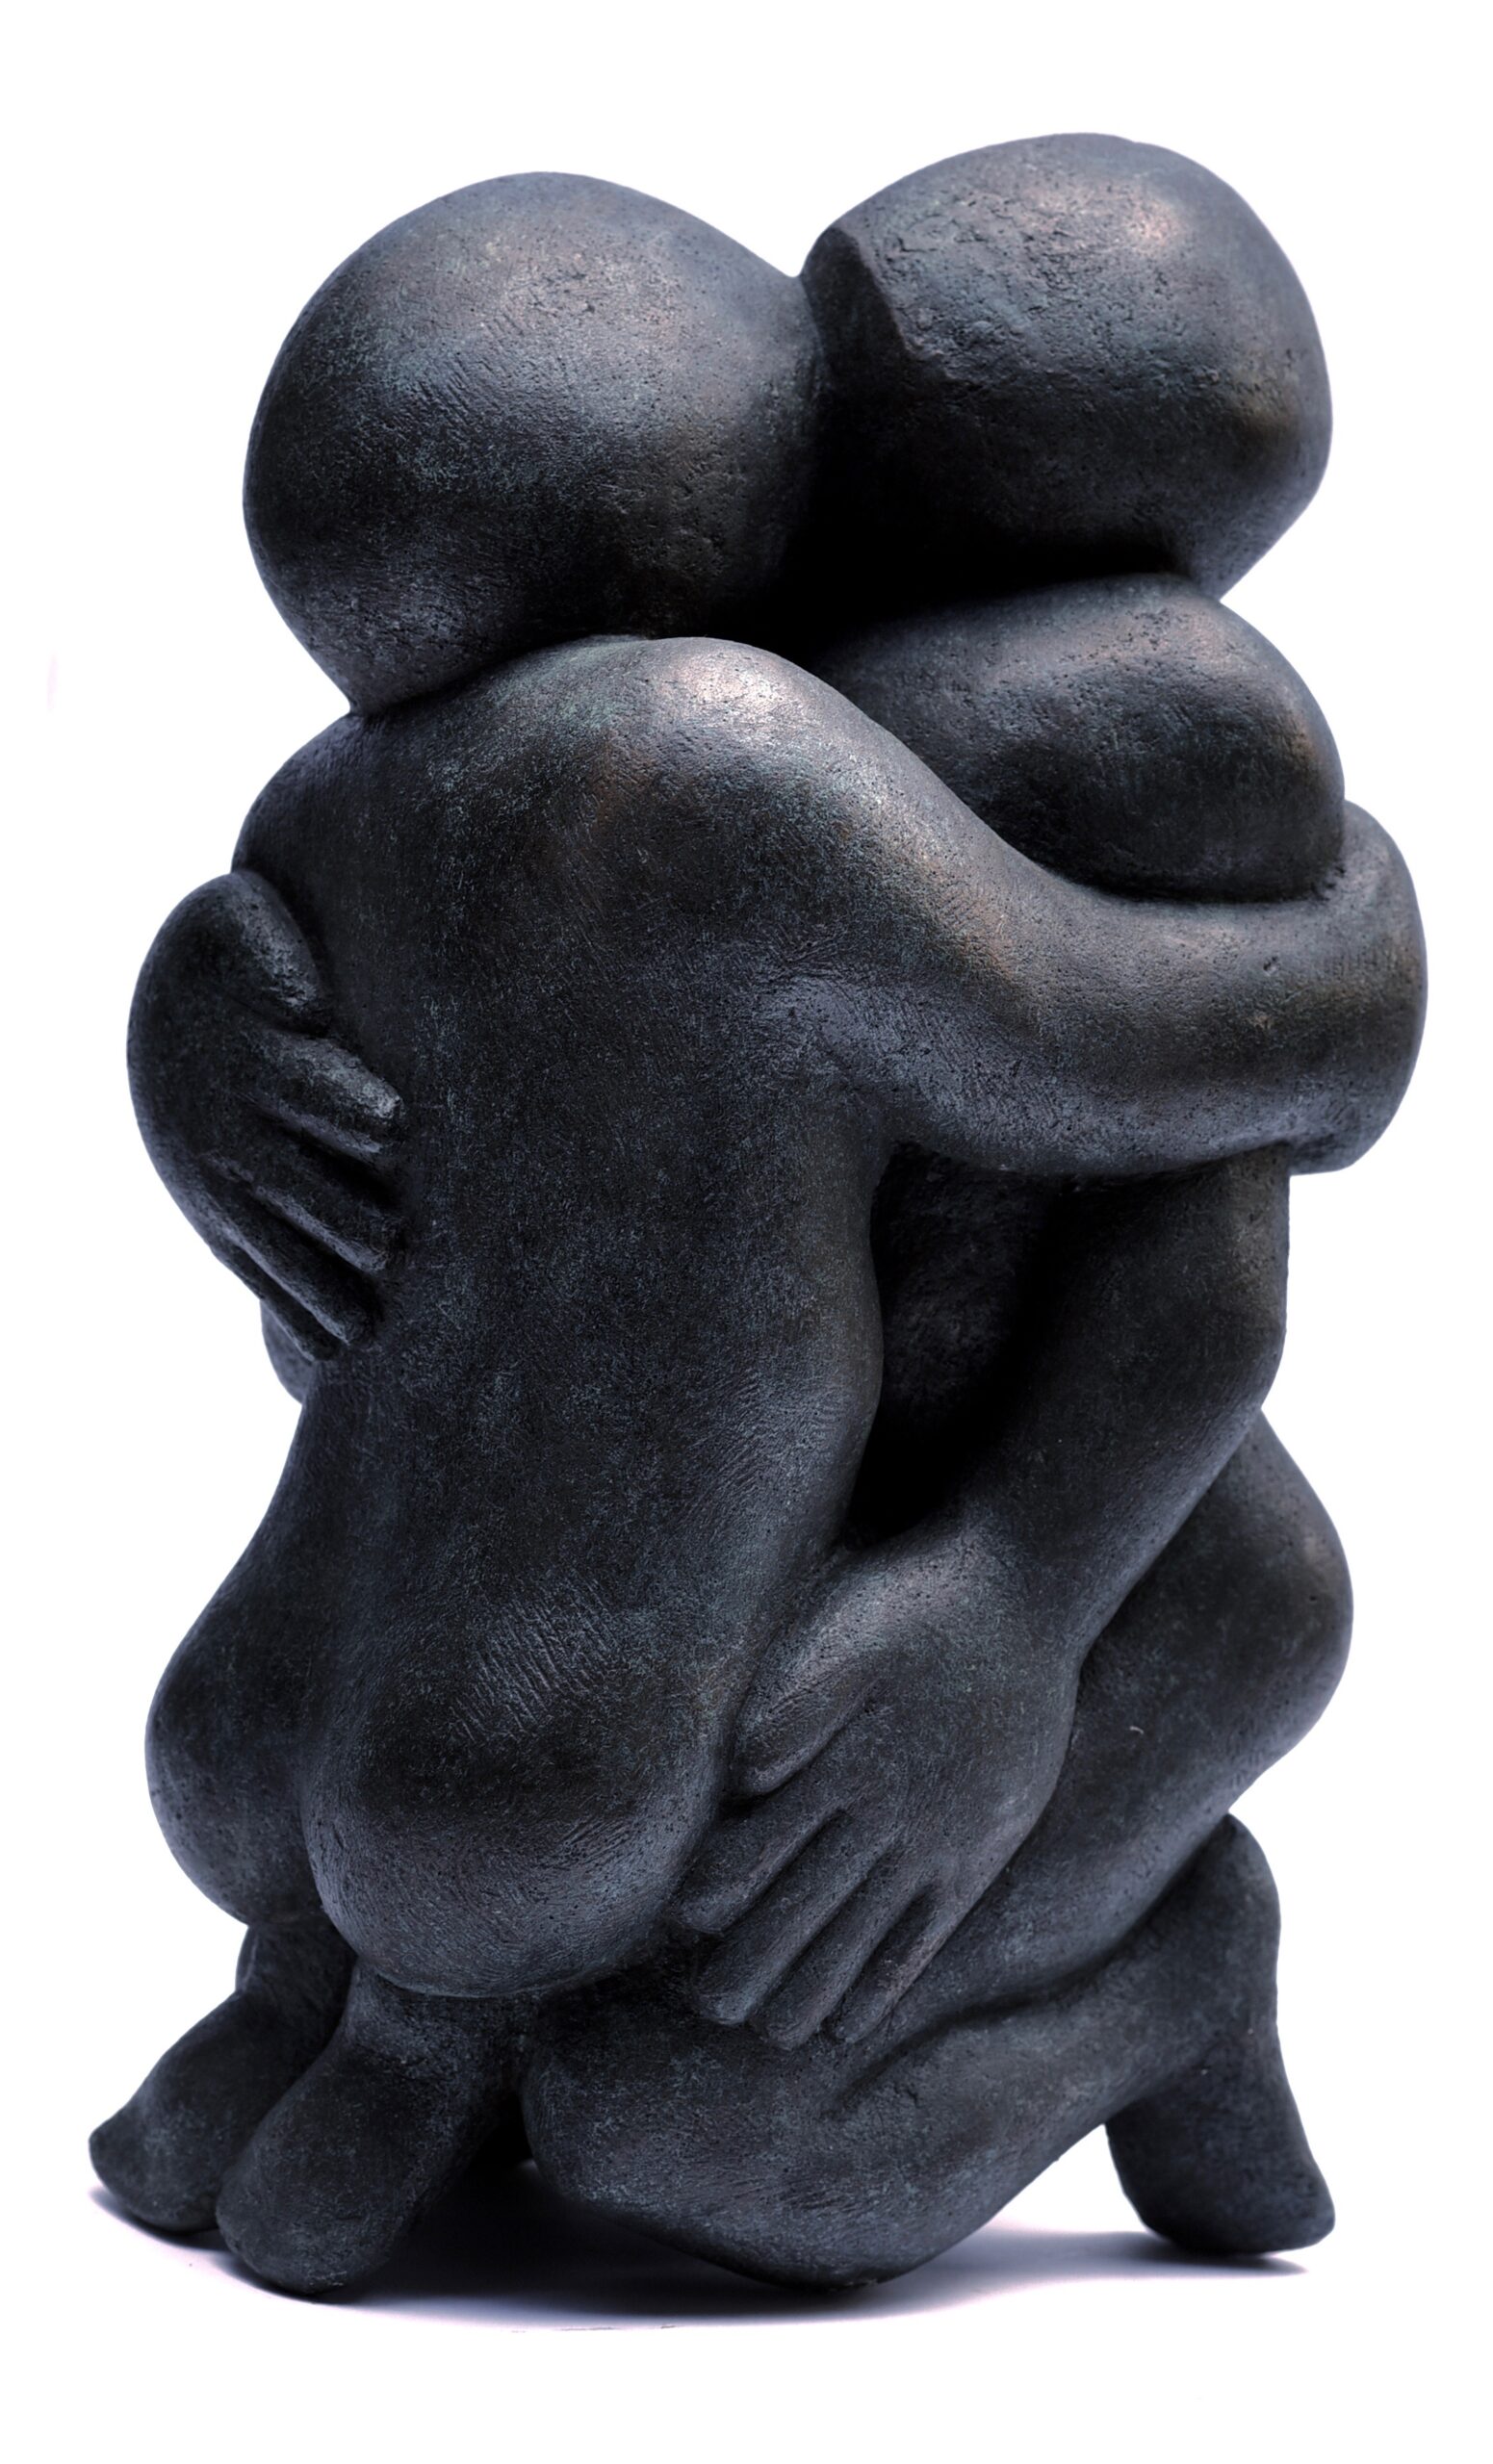 contemporary bronze sculpture of an affectionate hug suitable for a wedding anniversary